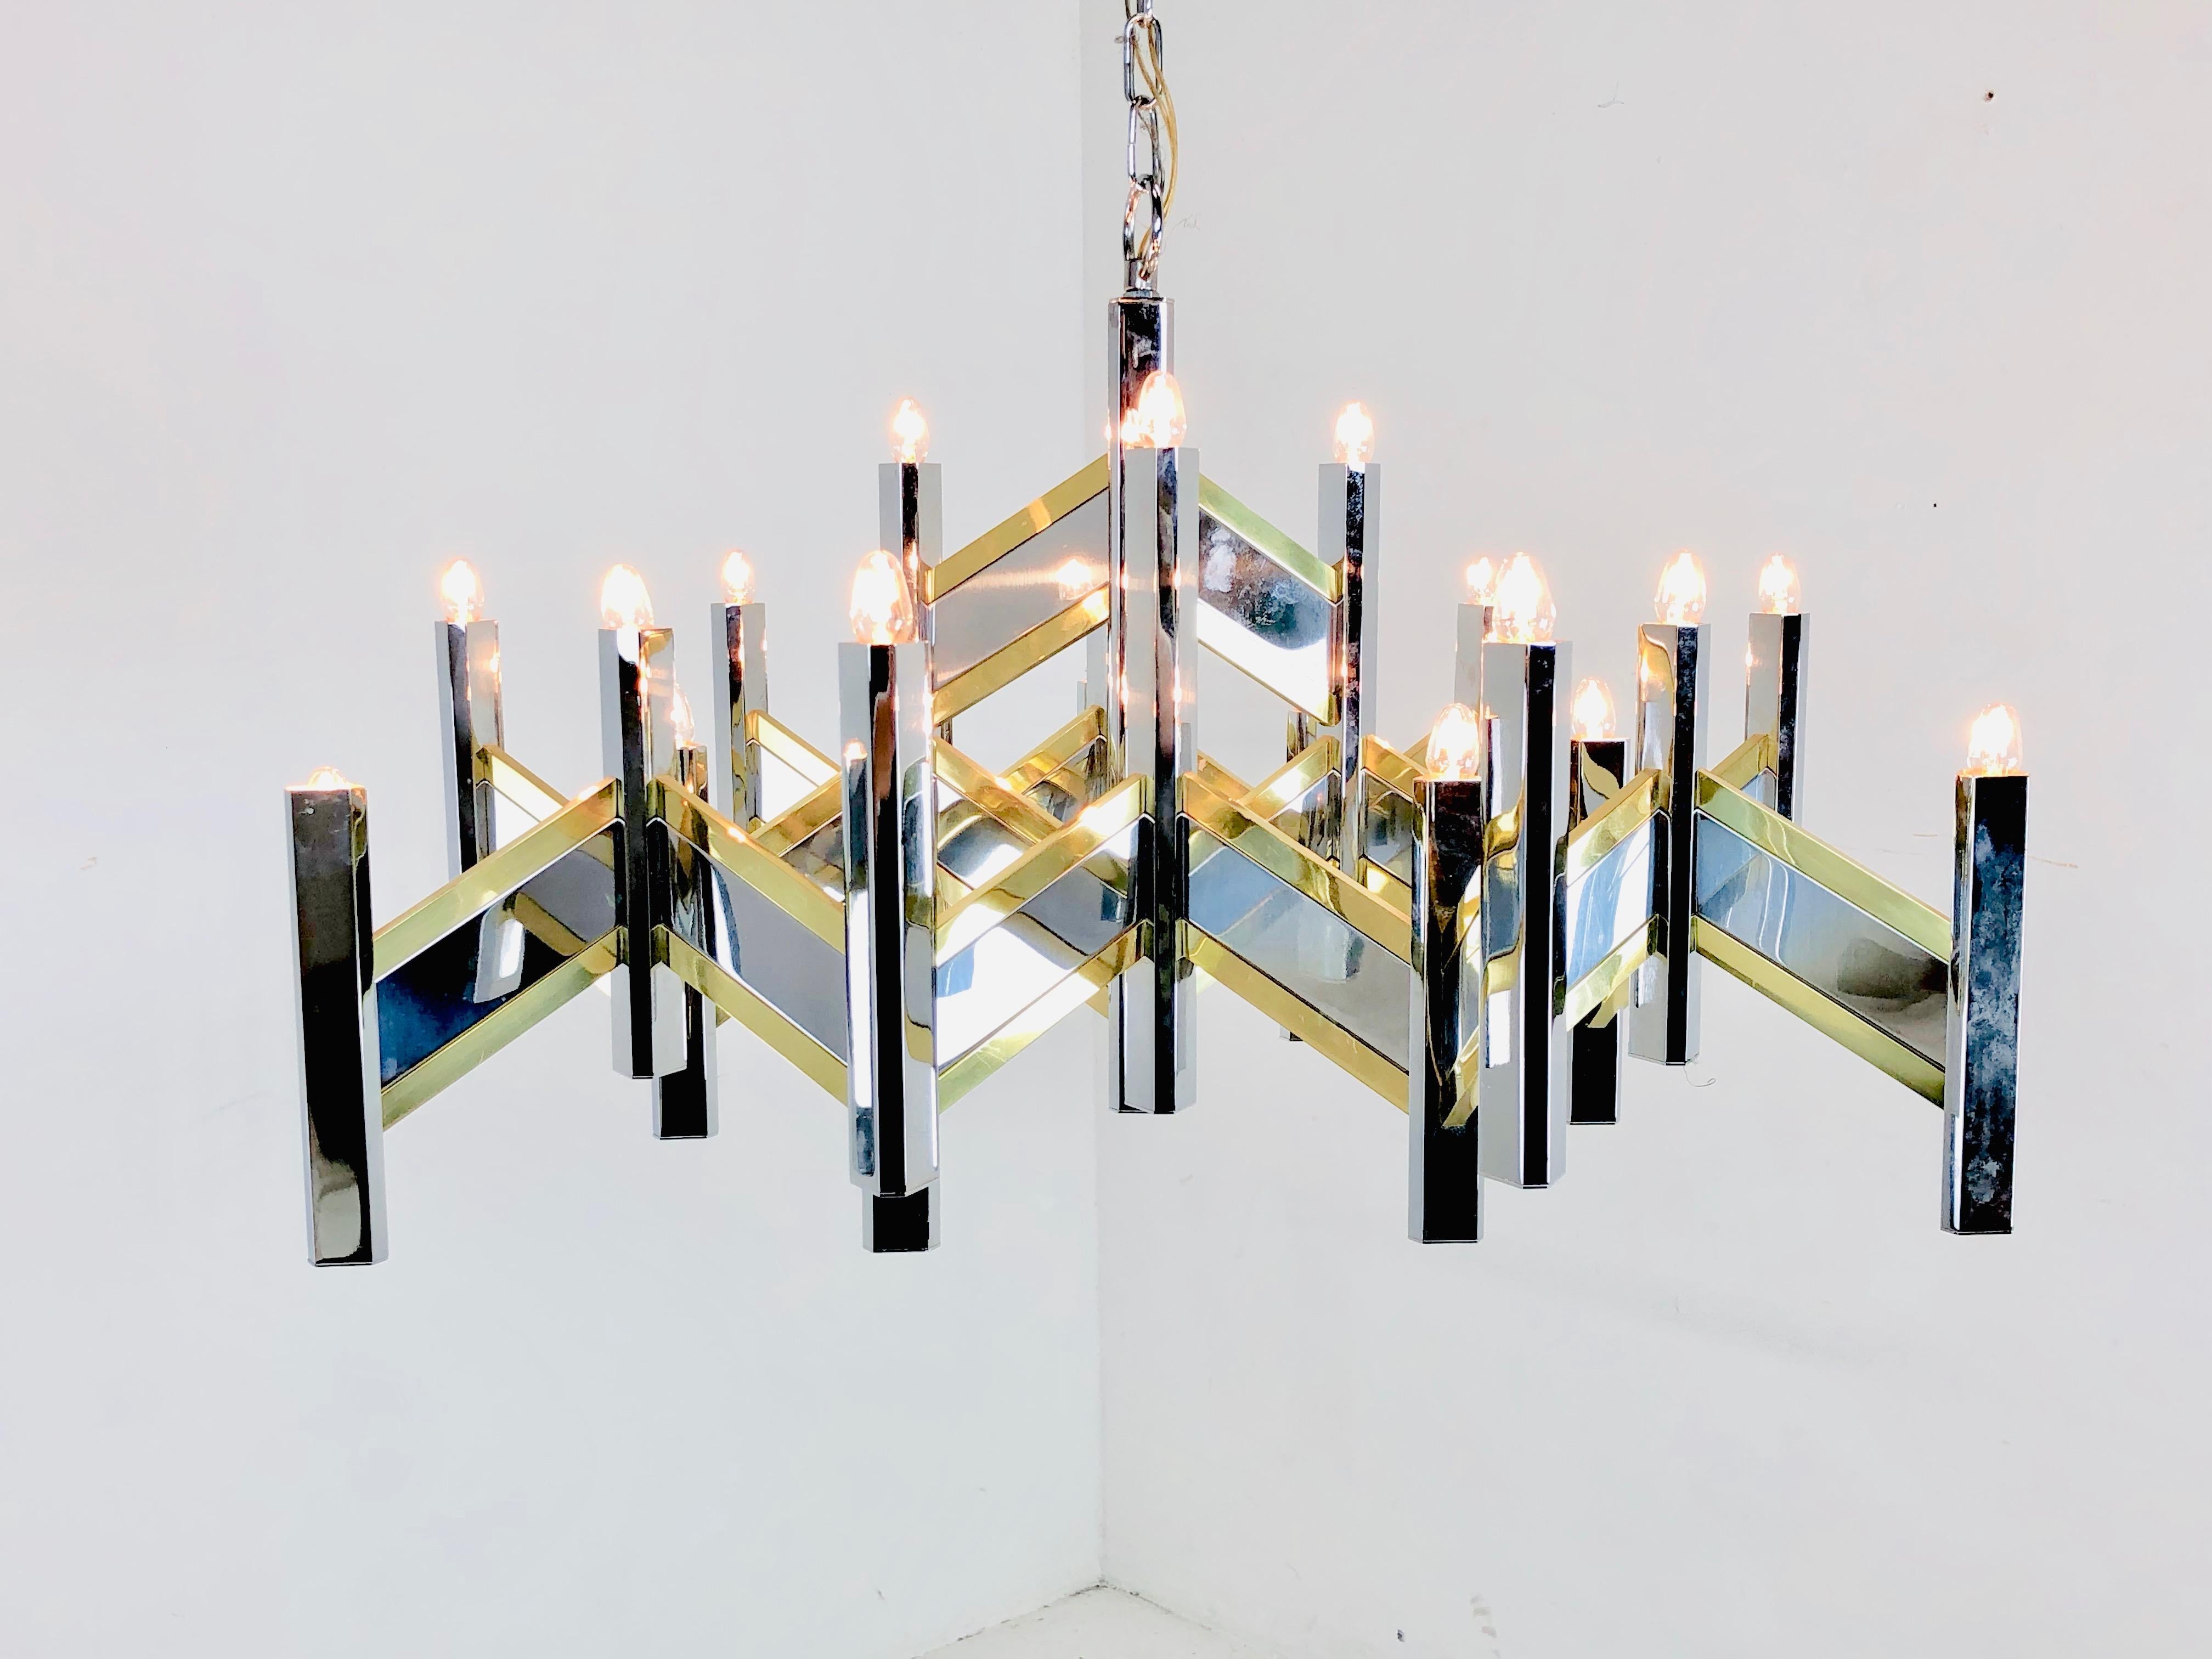 Vintage Geometric Sciolari chrome and brass plated chandelier. There is a section where there is pitting on the metal. See pictures. The chandelier is in good vintage condition with original wiring.

Dimensions:
31 D x 19 T.